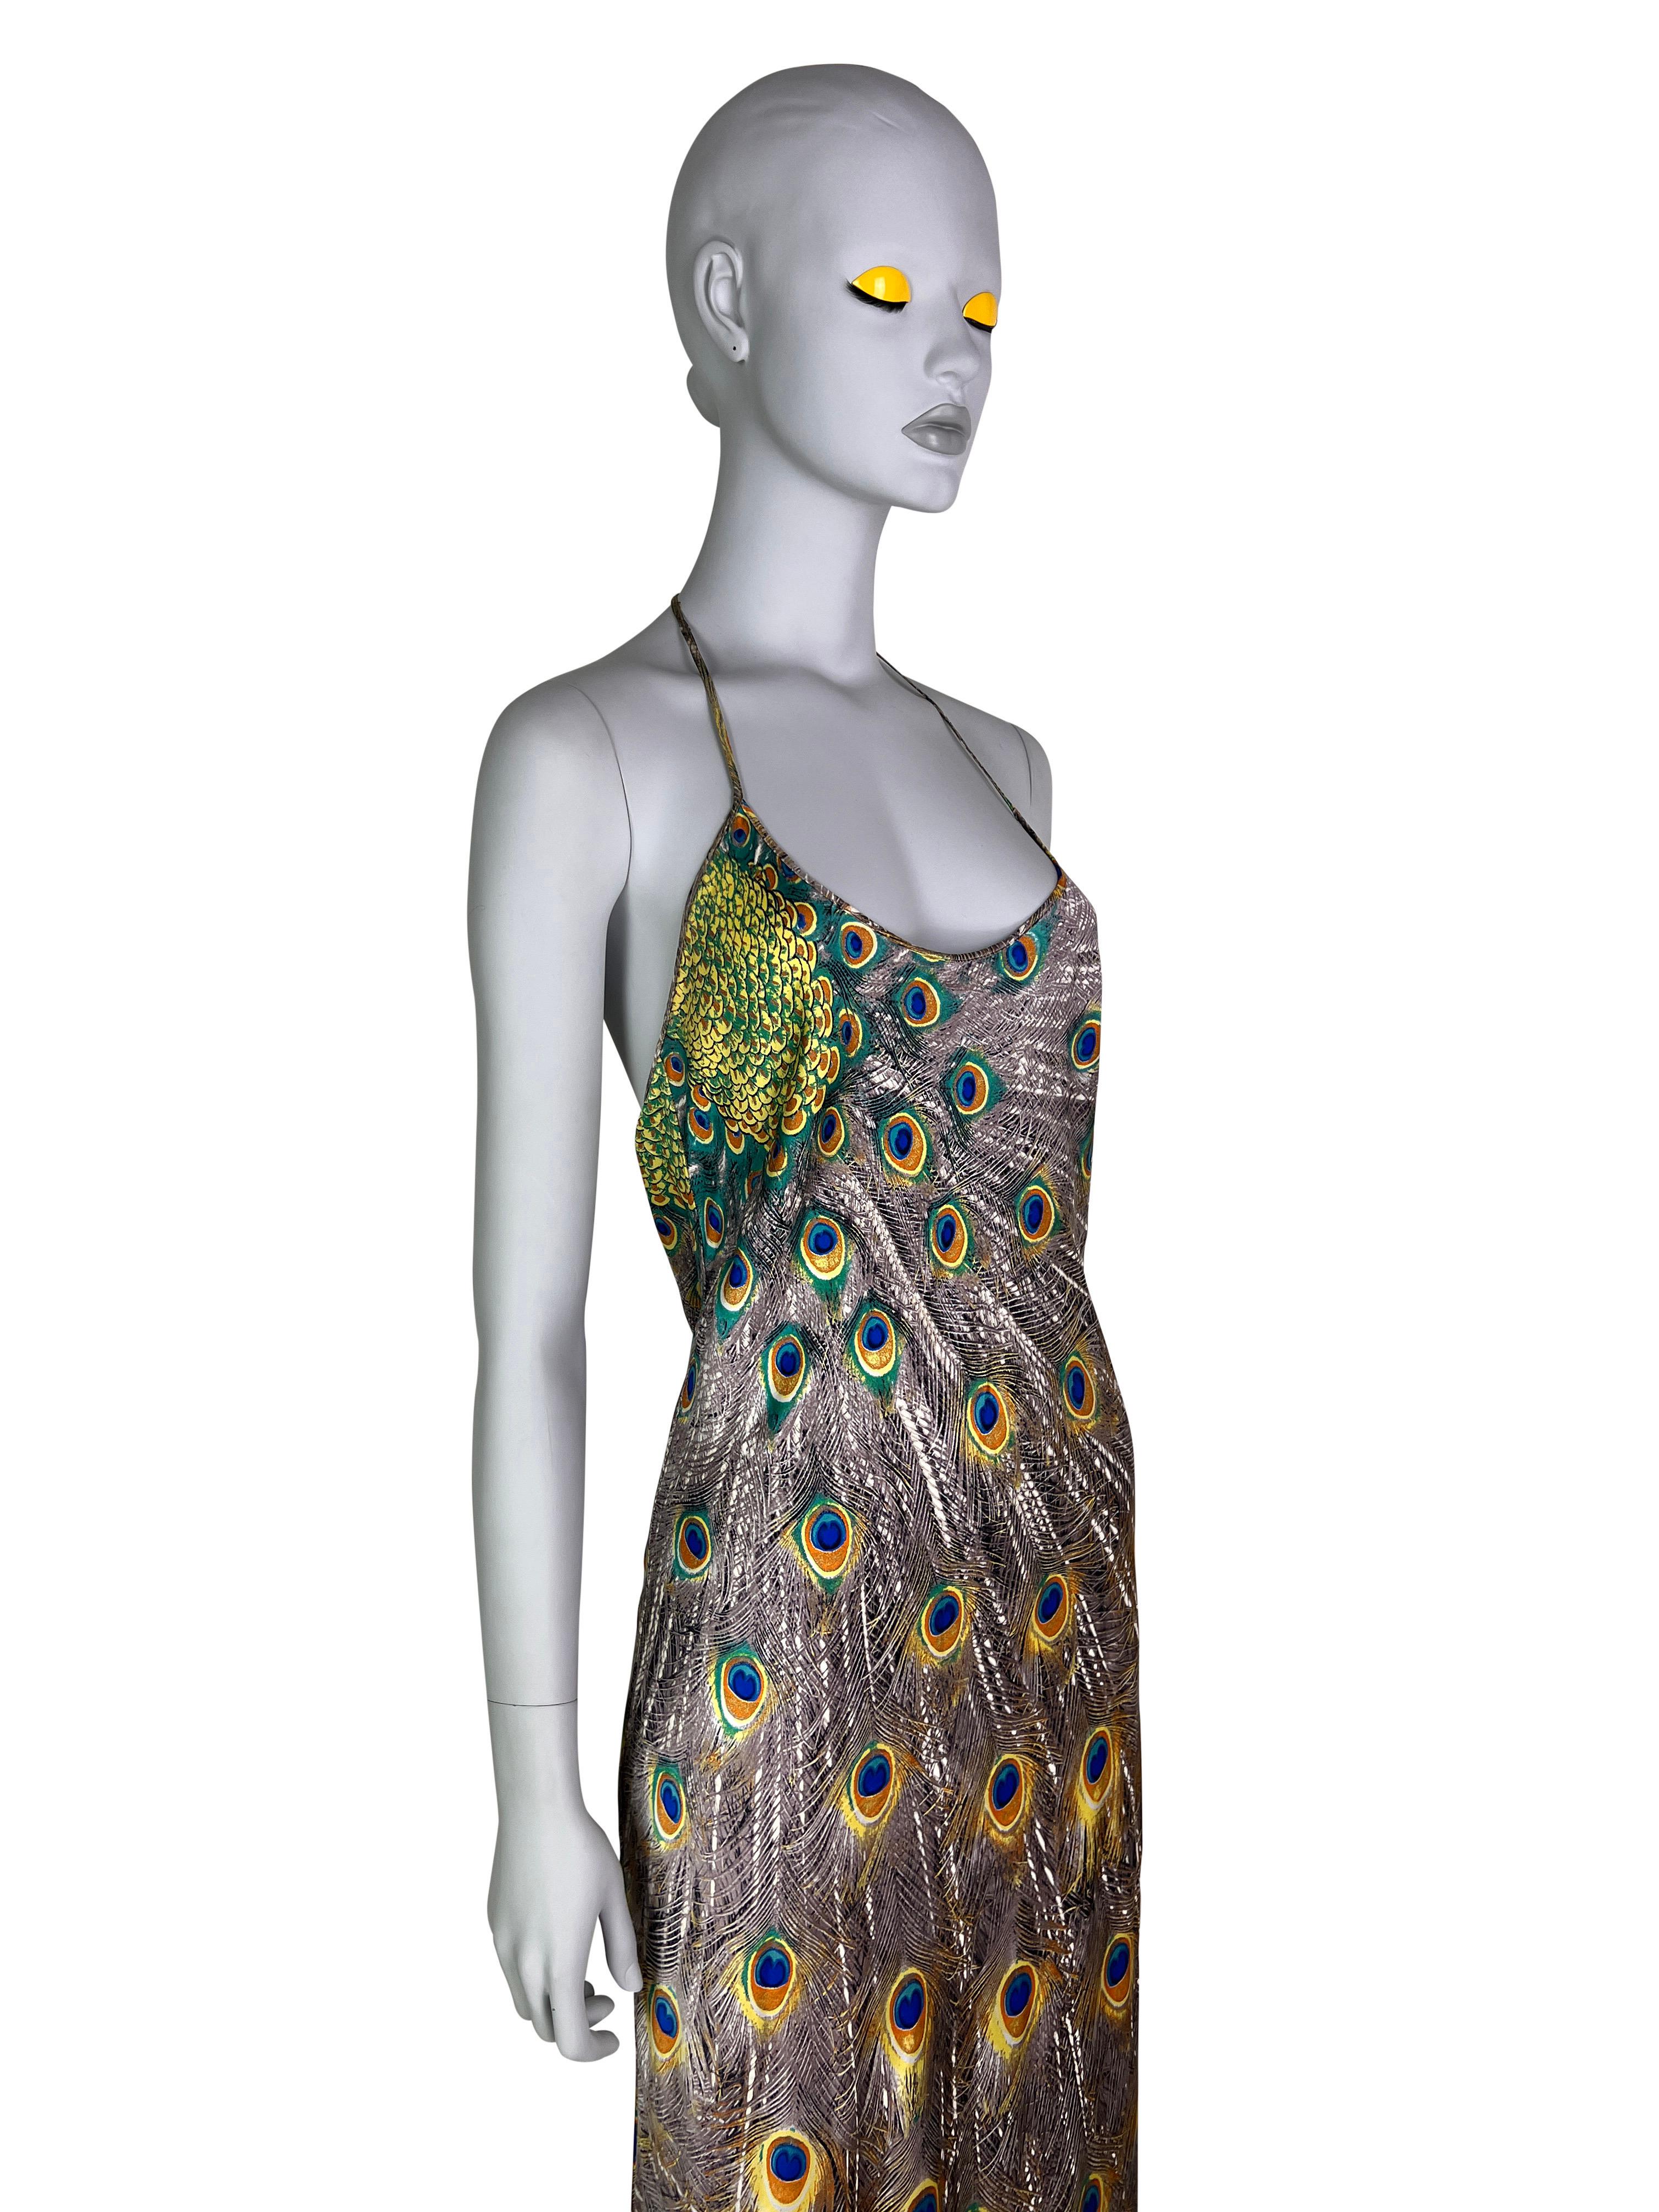 Roberto Cavalli Fall 1999 Peacock Print Bias Cut Silk Gown  In Excellent Condition For Sale In Prague, CZ